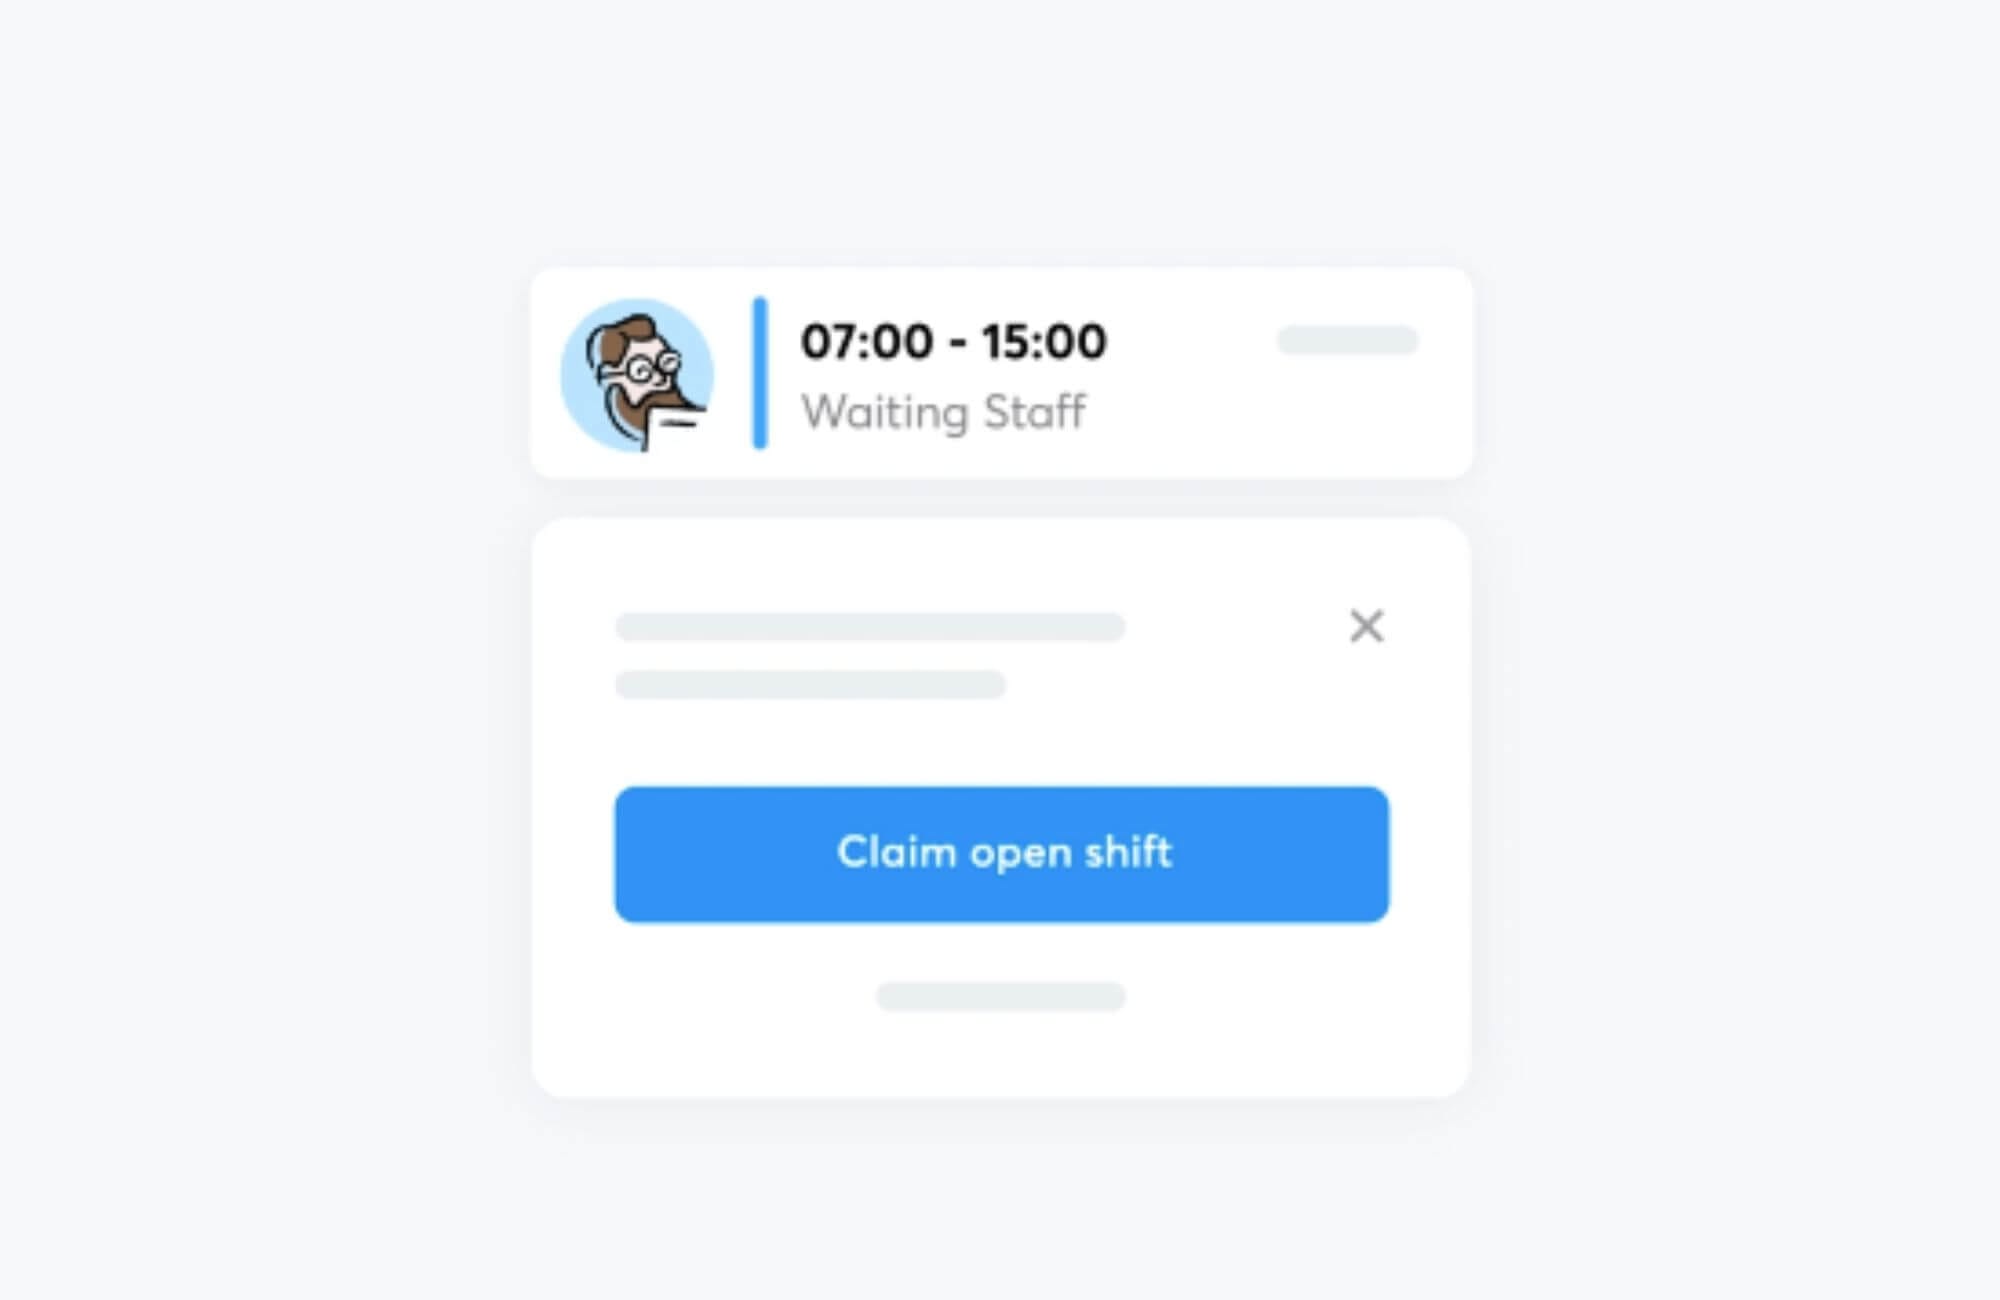 Claiming an open shift available